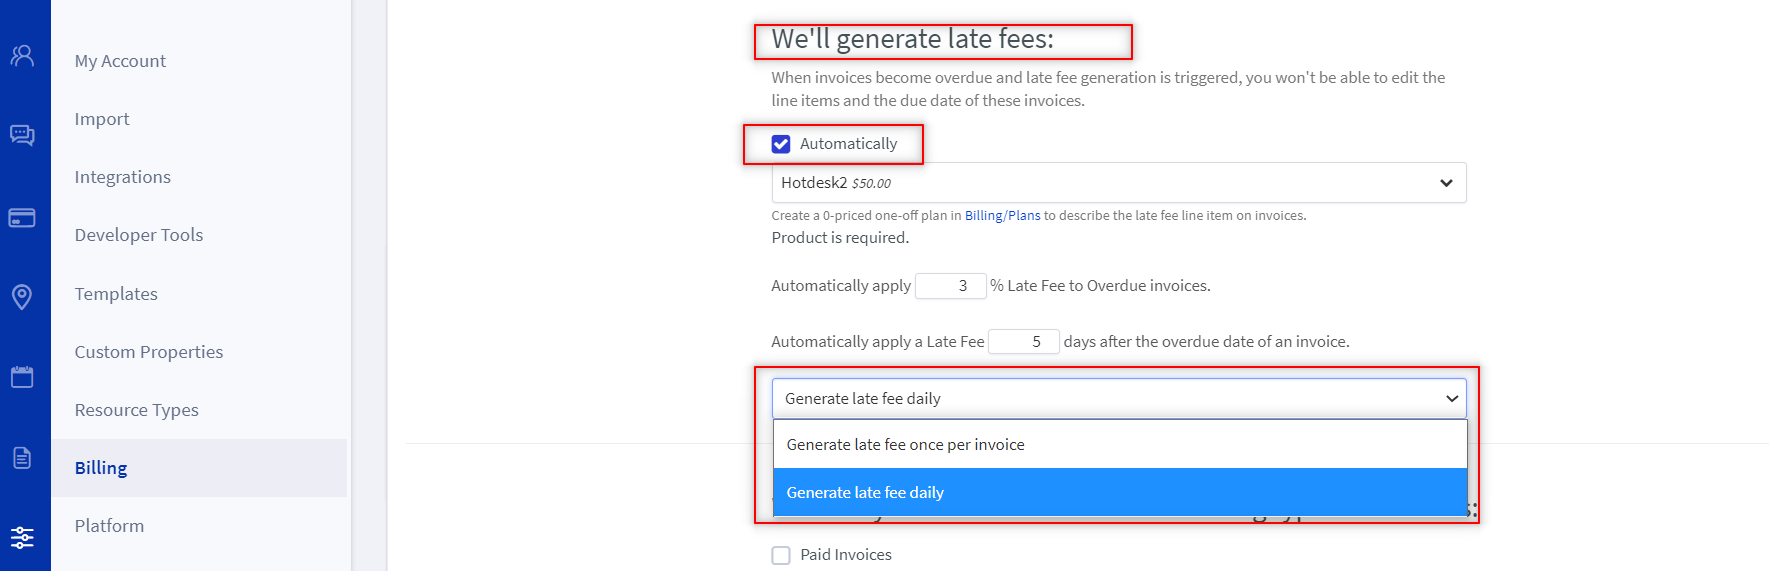 generate_late_fees.png